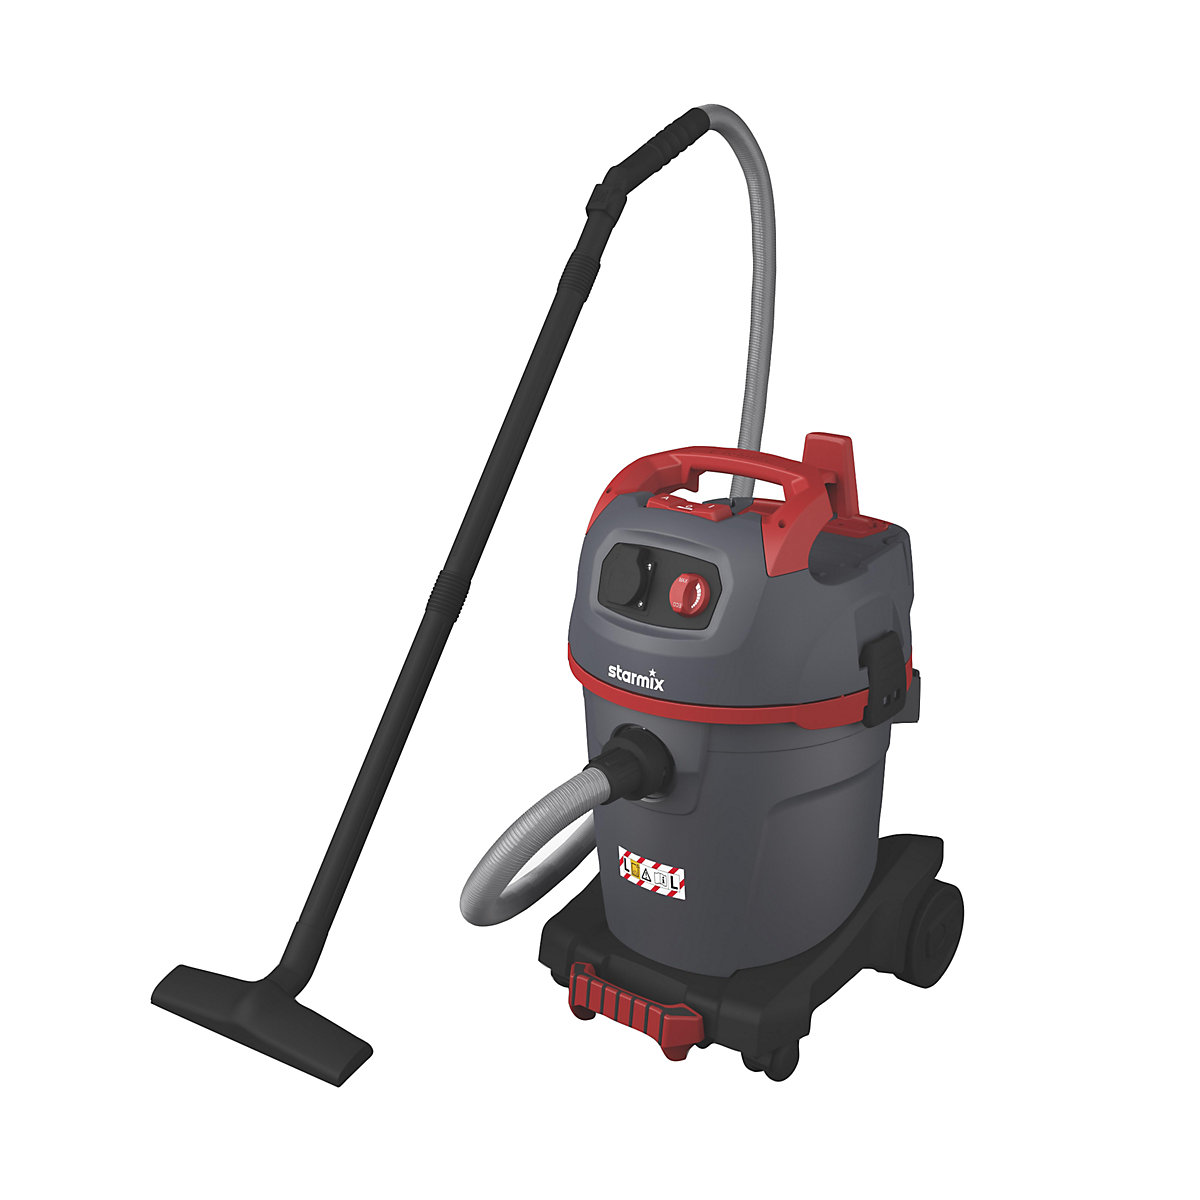 Wet and dry vacuum cleaner – starmix